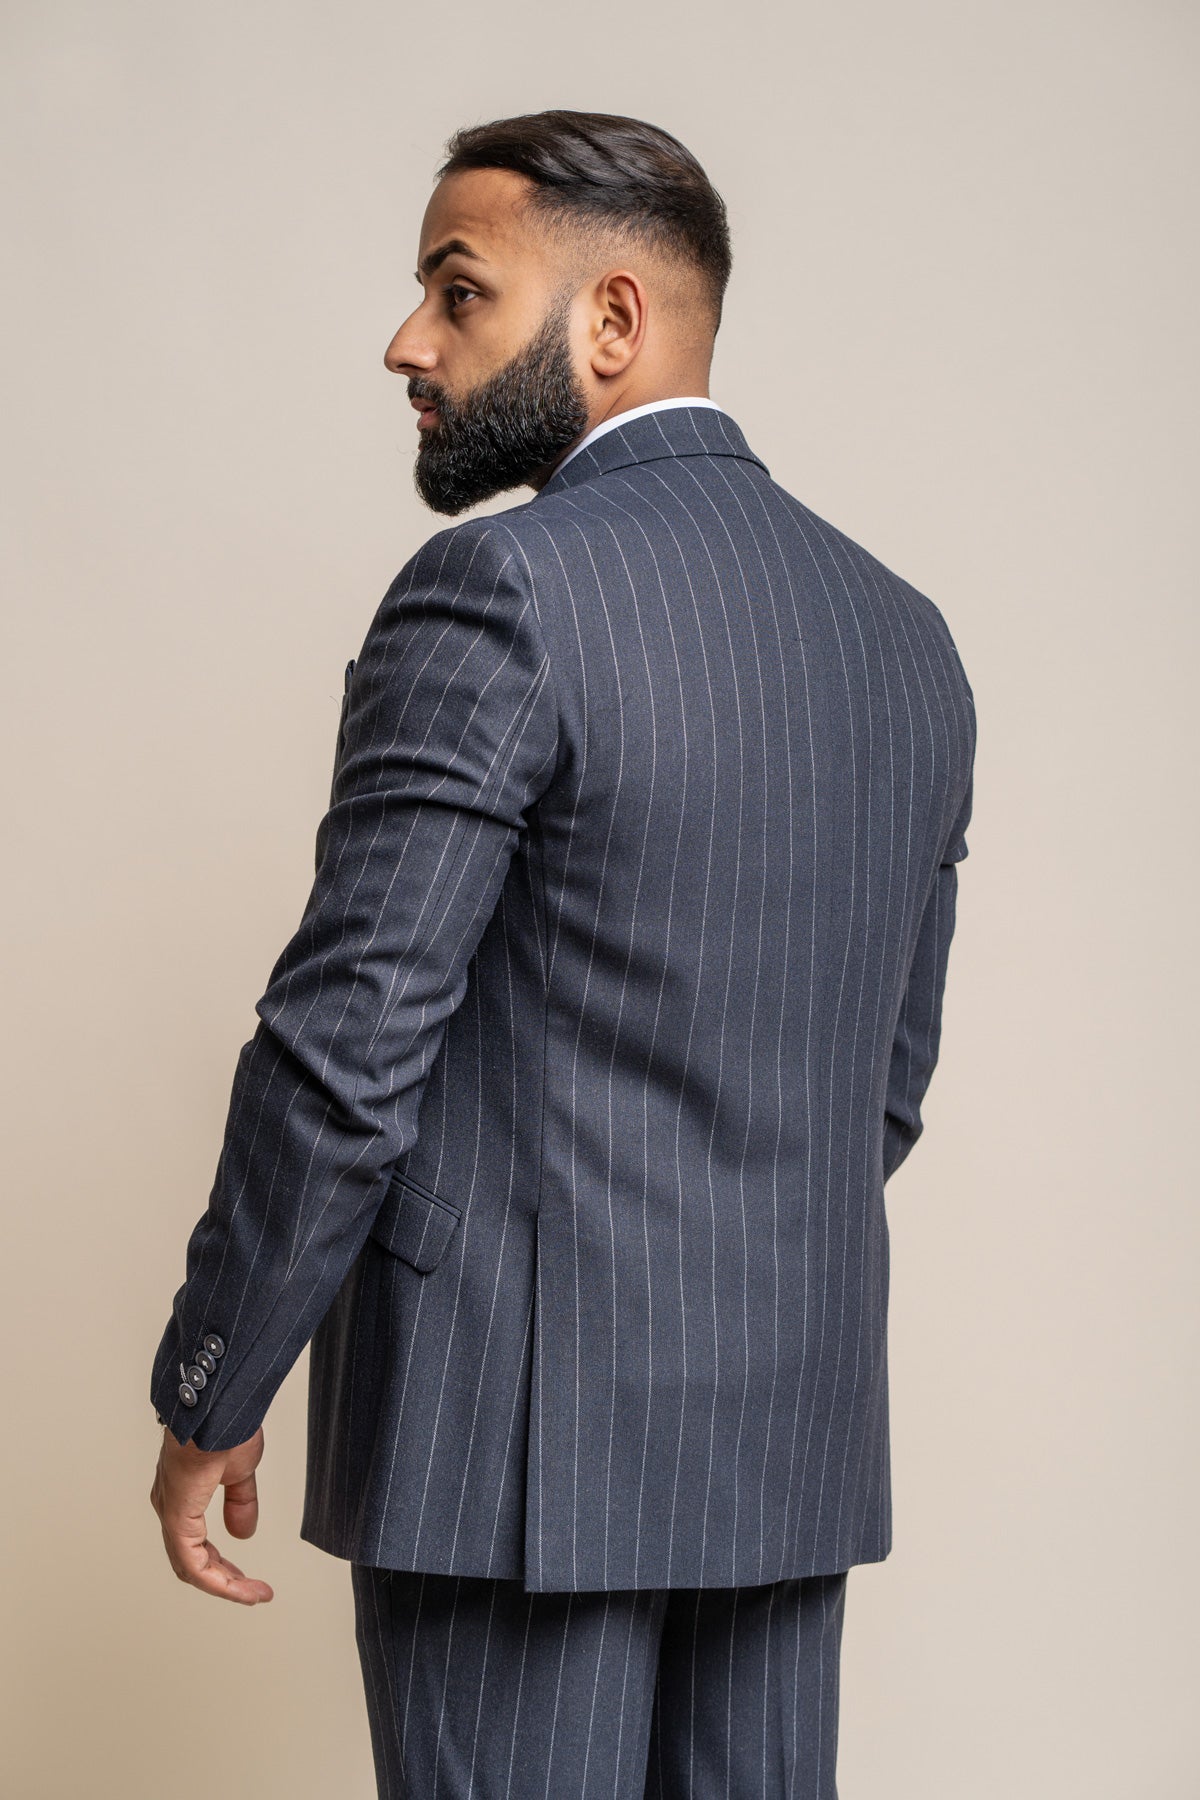 Invincible Navy Pinstripe 3 Piece Wedding Suit - Suits - - Swagger & Swoon